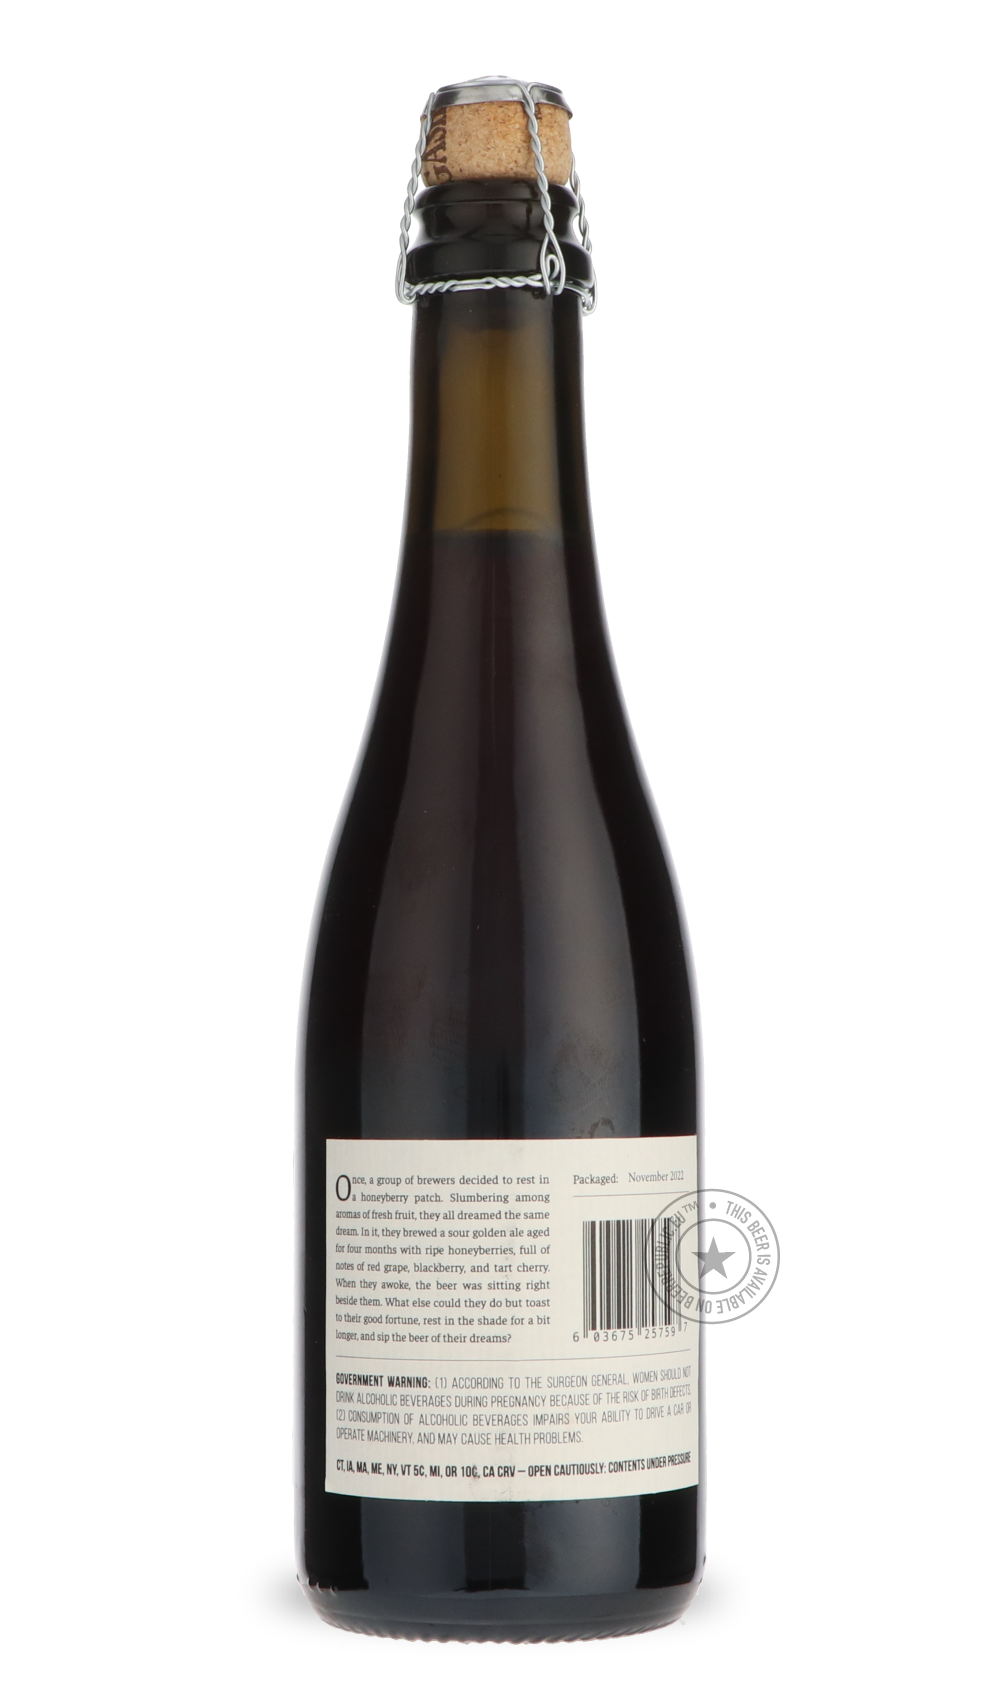 -Allagash- Once Upon An Orchard - Honeyberries-Sour / Wild & Fruity- Only @ Beer Republic - The best online beer store for American & Canadian craft beer - Buy beer online from the USA and Canada - Bier online kopen - Amerikaans bier kopen - Craft beer store - Craft beer kopen - Amerikanisch bier kaufen - Bier online kaufen - Acheter biere online - IPA - Stout - Porter - New England IPA - Hazy IPA - Imperial Stout - Barrel Aged - Barrel Aged Imperial Stout - Brown - Dark beer - Blond - Blonde - Pilsner - La